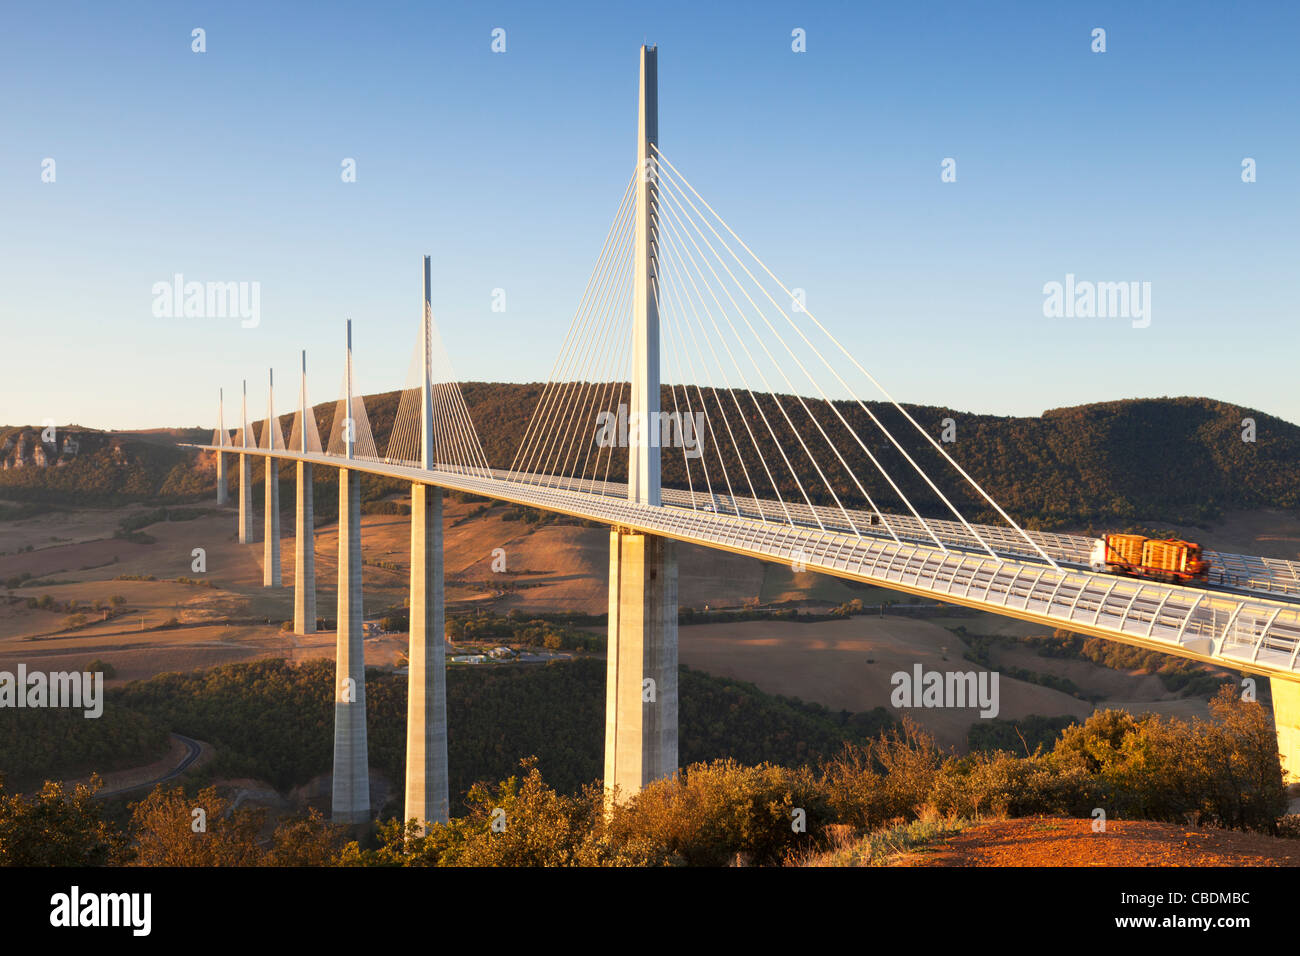 The Millau viaduct spans the Gorge du Tarn in Midi-Pyrenees, France. Stock Photo